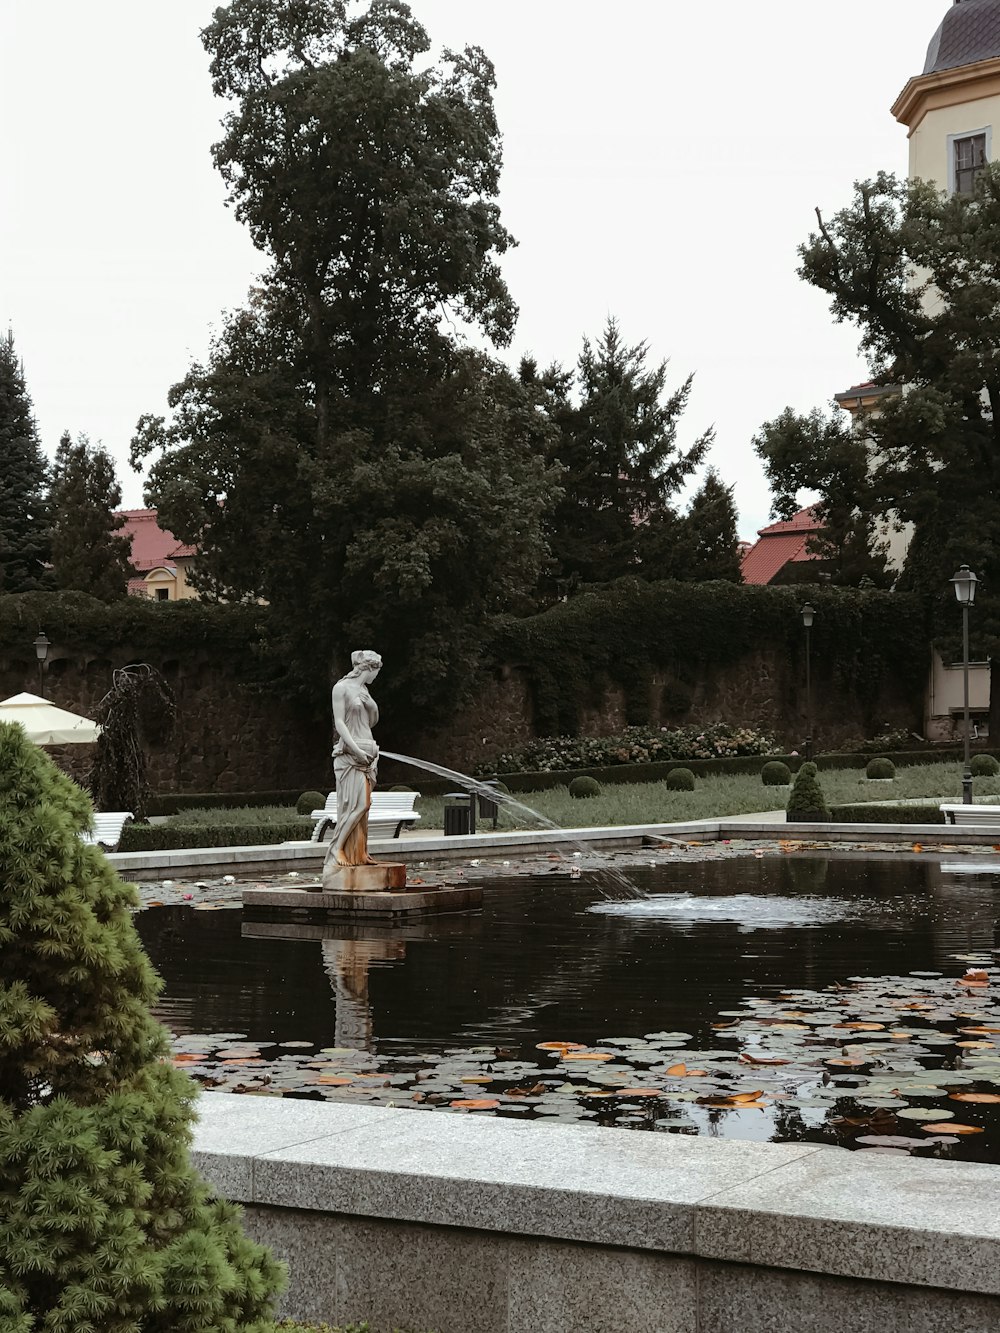 a statue of a person standing in a pond